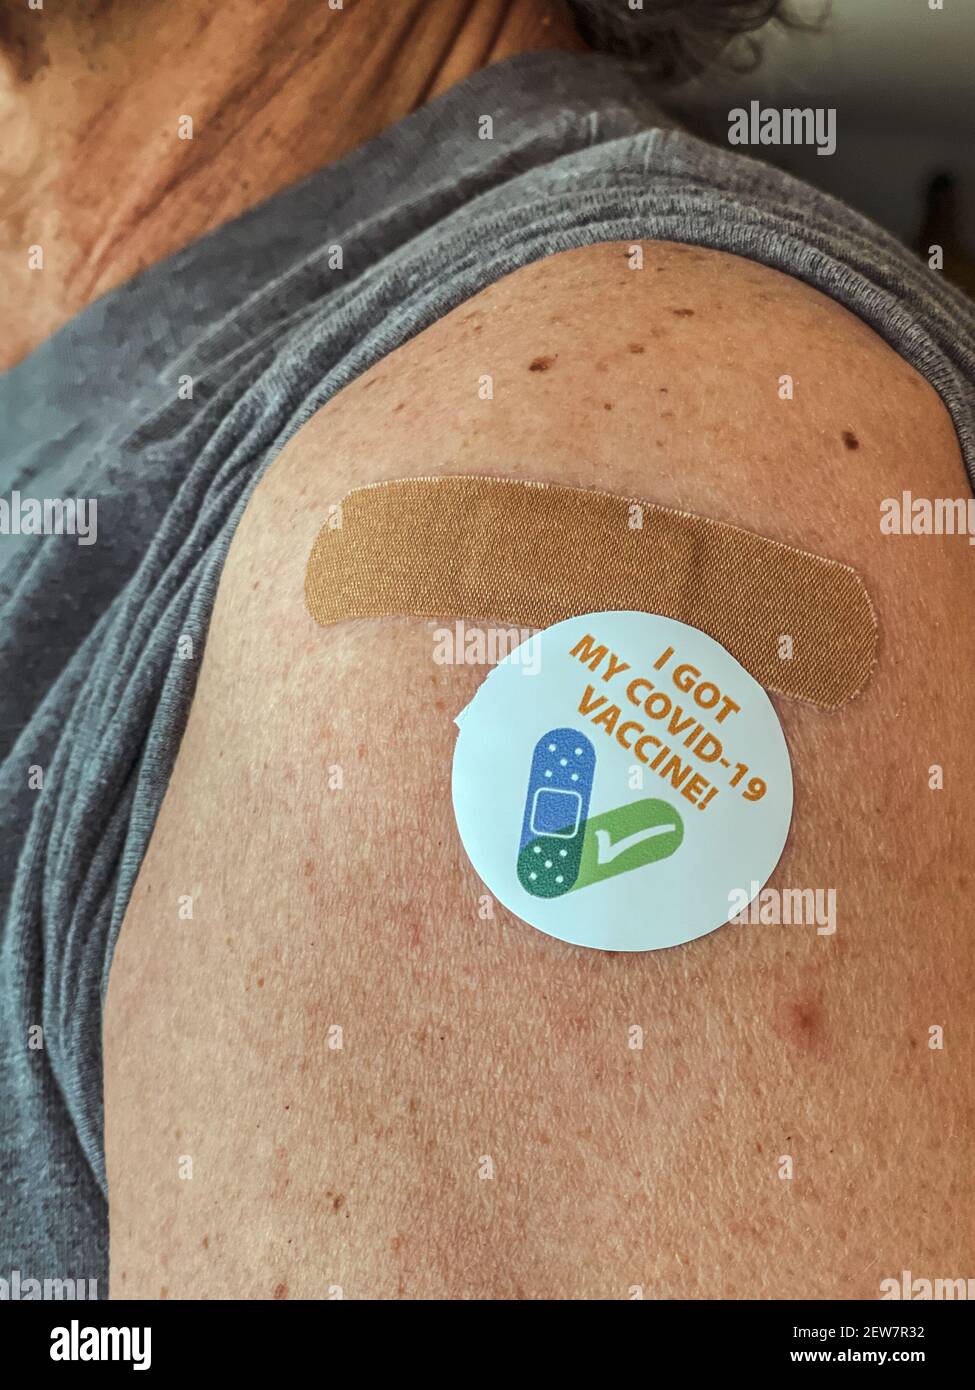 Senior adult man showing his adhesive covid-19 vaccination sticker. I got my COVID-19 vaccine. With bandaid. Stock Photo